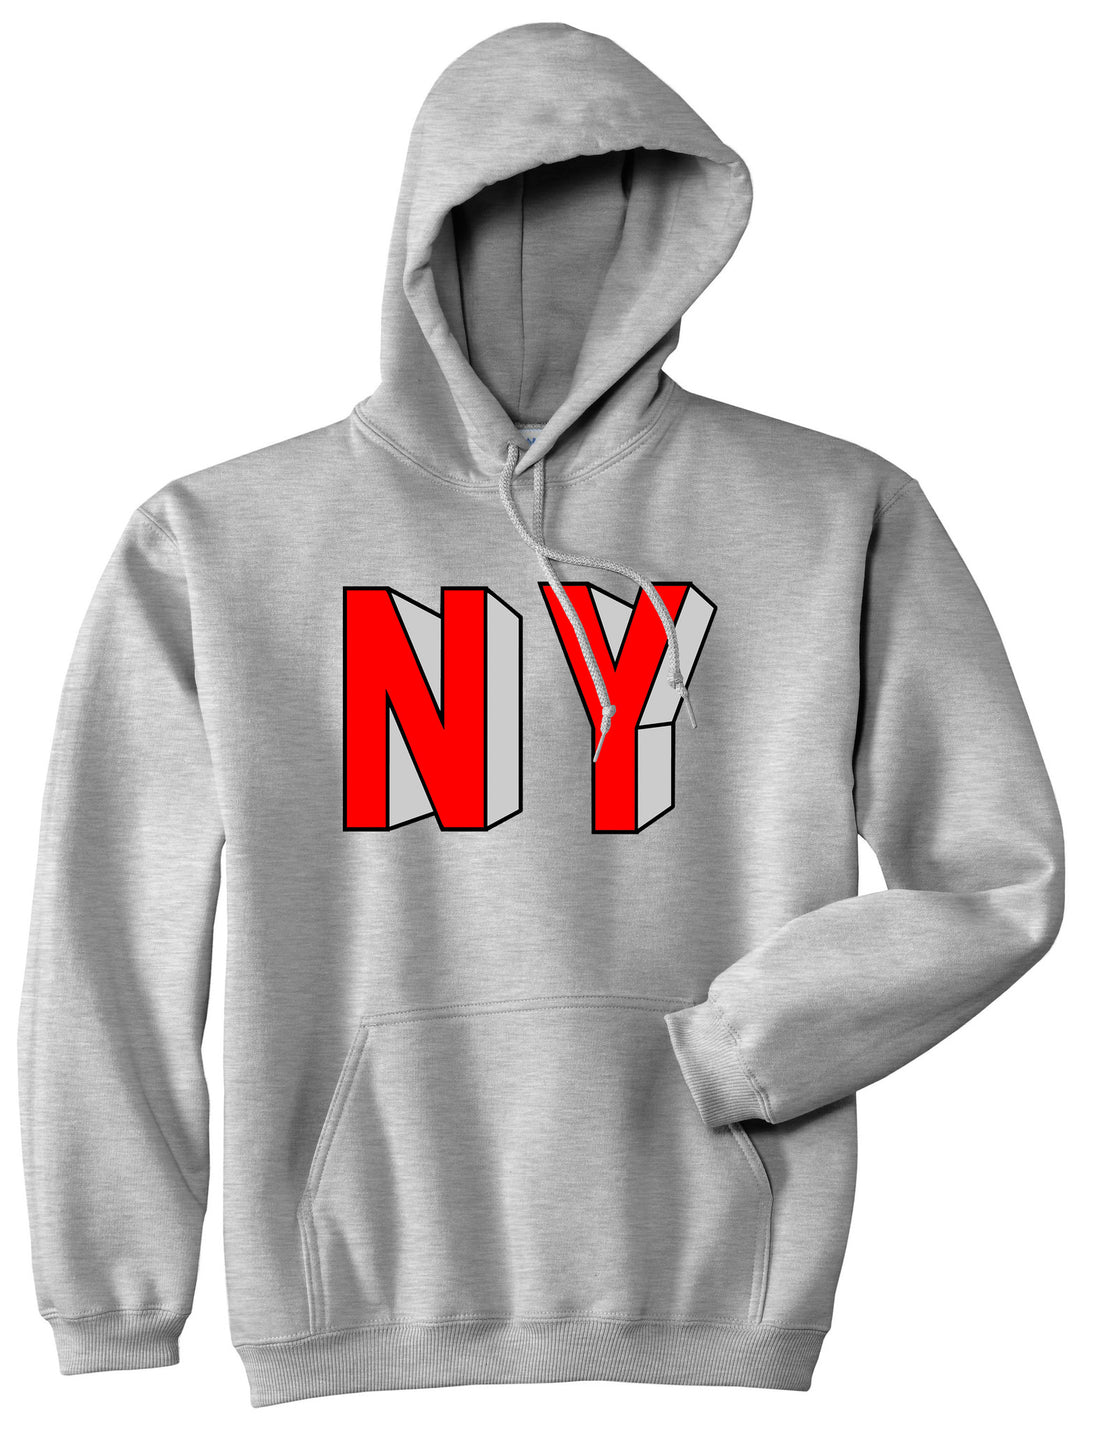 NY Block Letters Pullover Hoodie in Grey